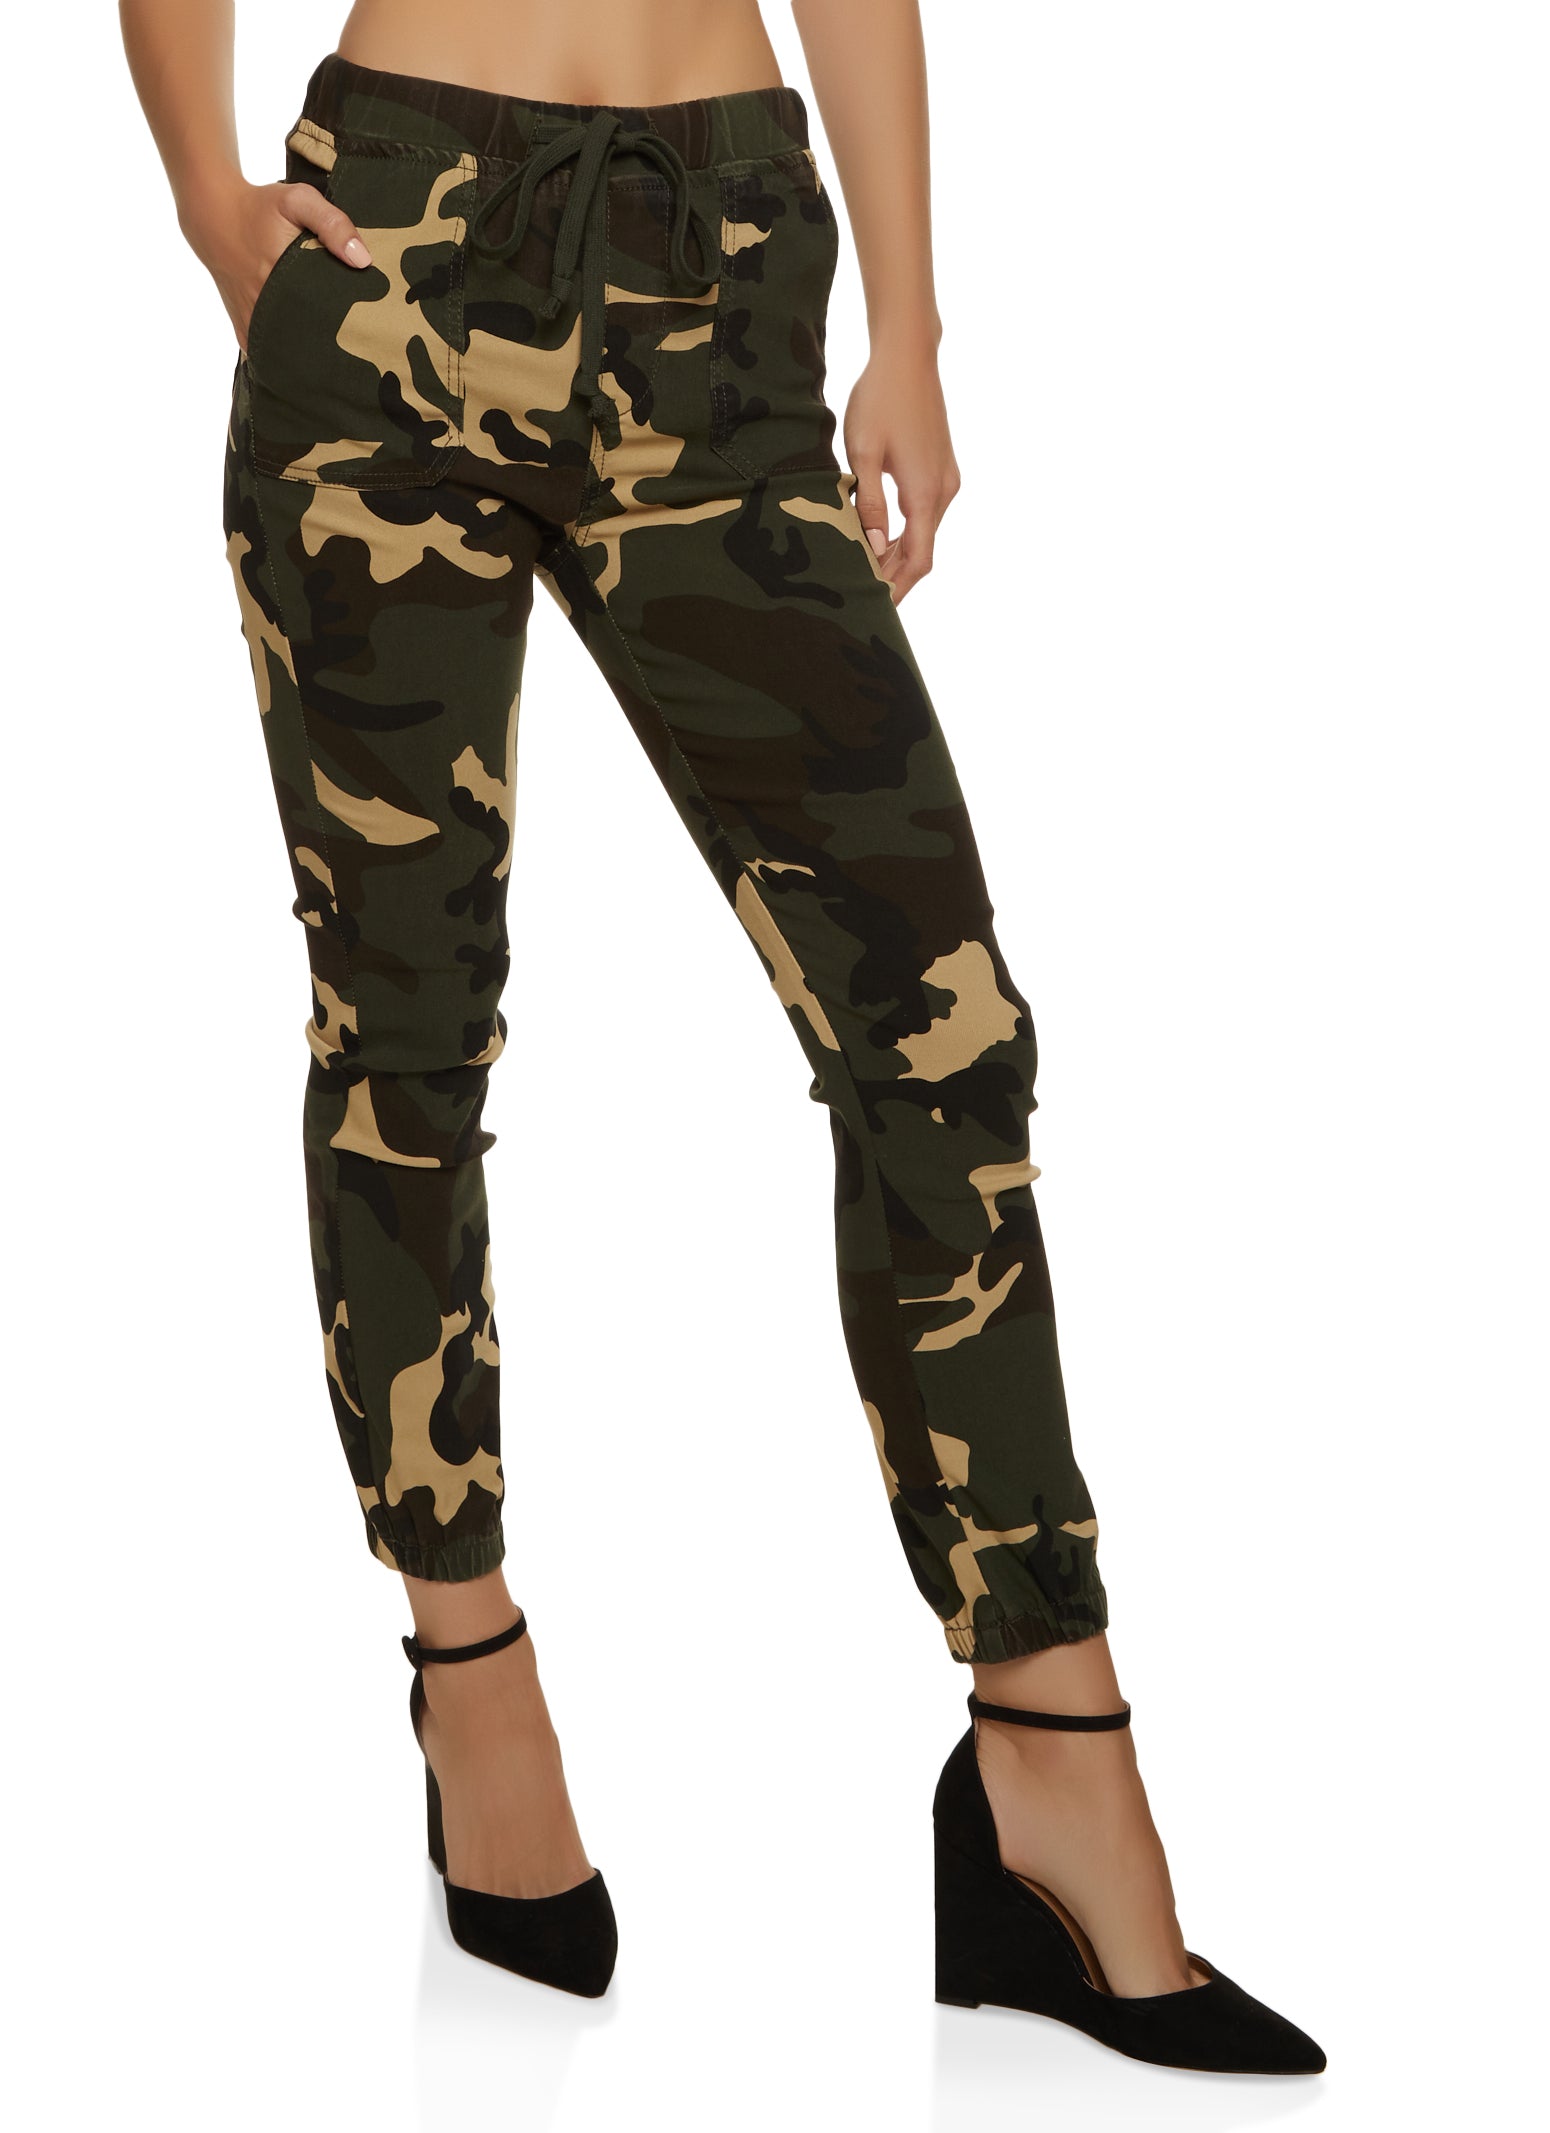 Womens Camo Clothing, Everyday Low Prices